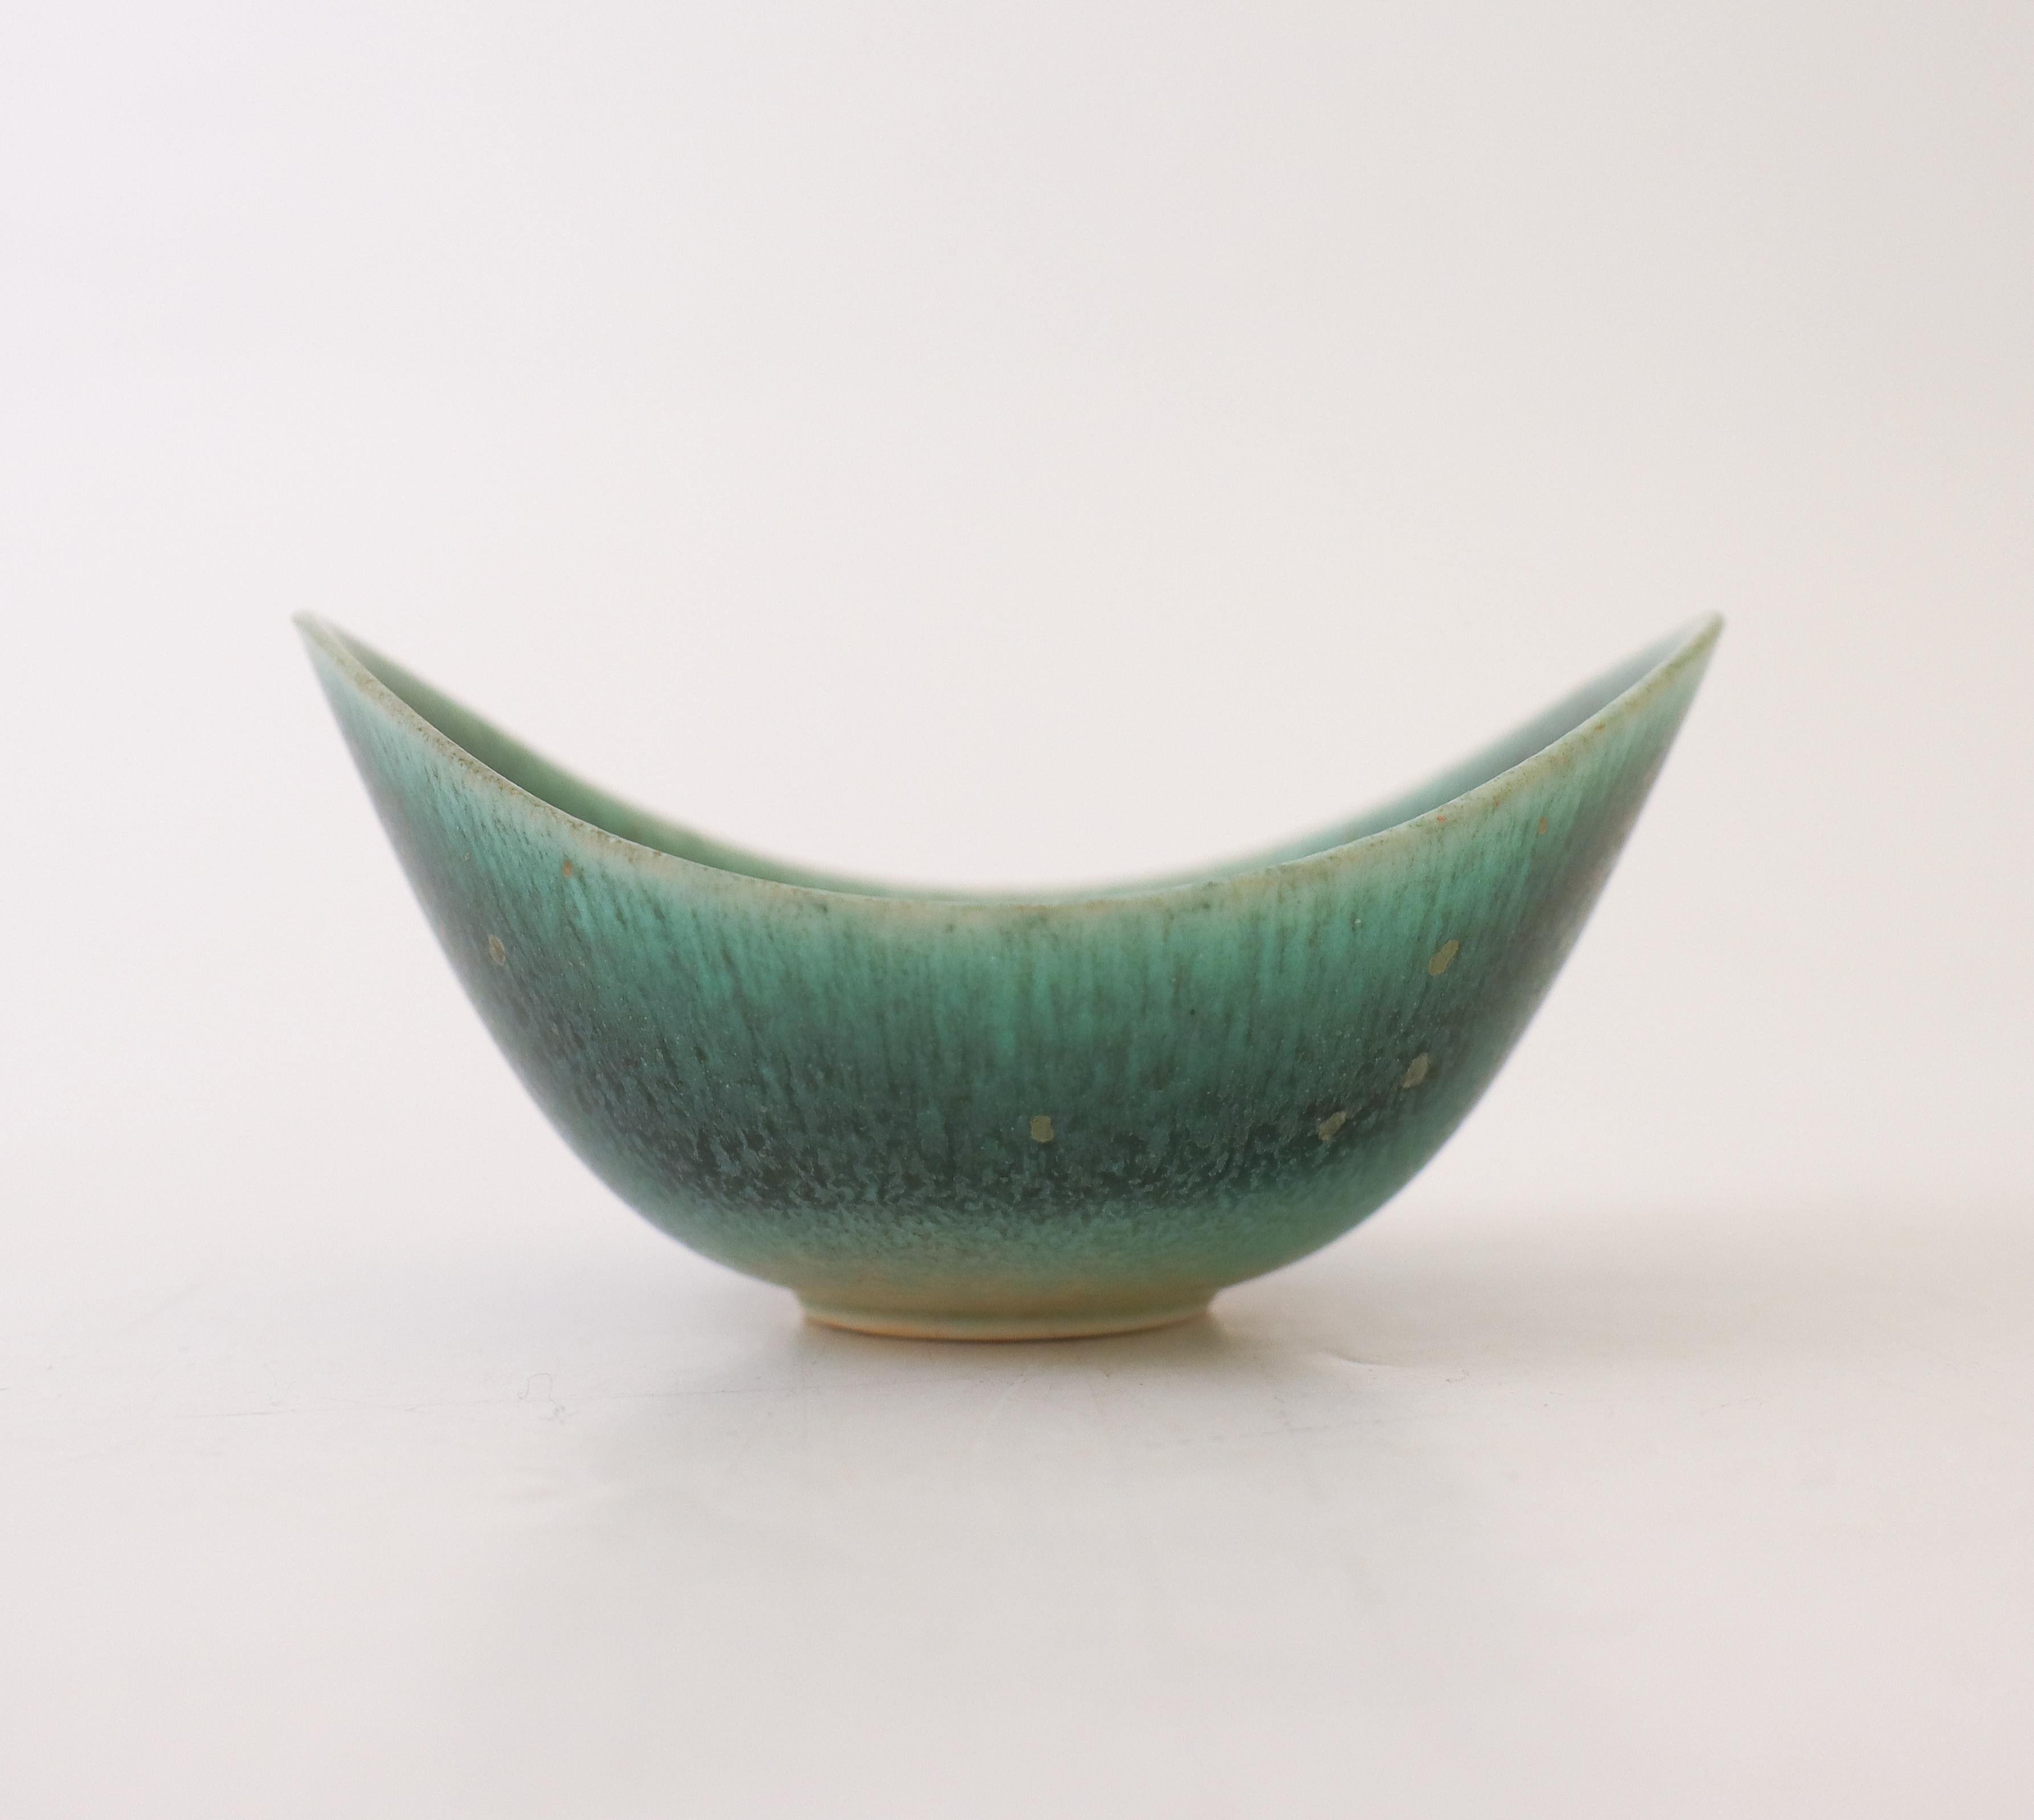 A dark turquoise or green bowl designed by Gunnar Nylund at Rörstrand, the bowl is 10.5 x 7.5 cm (4,2